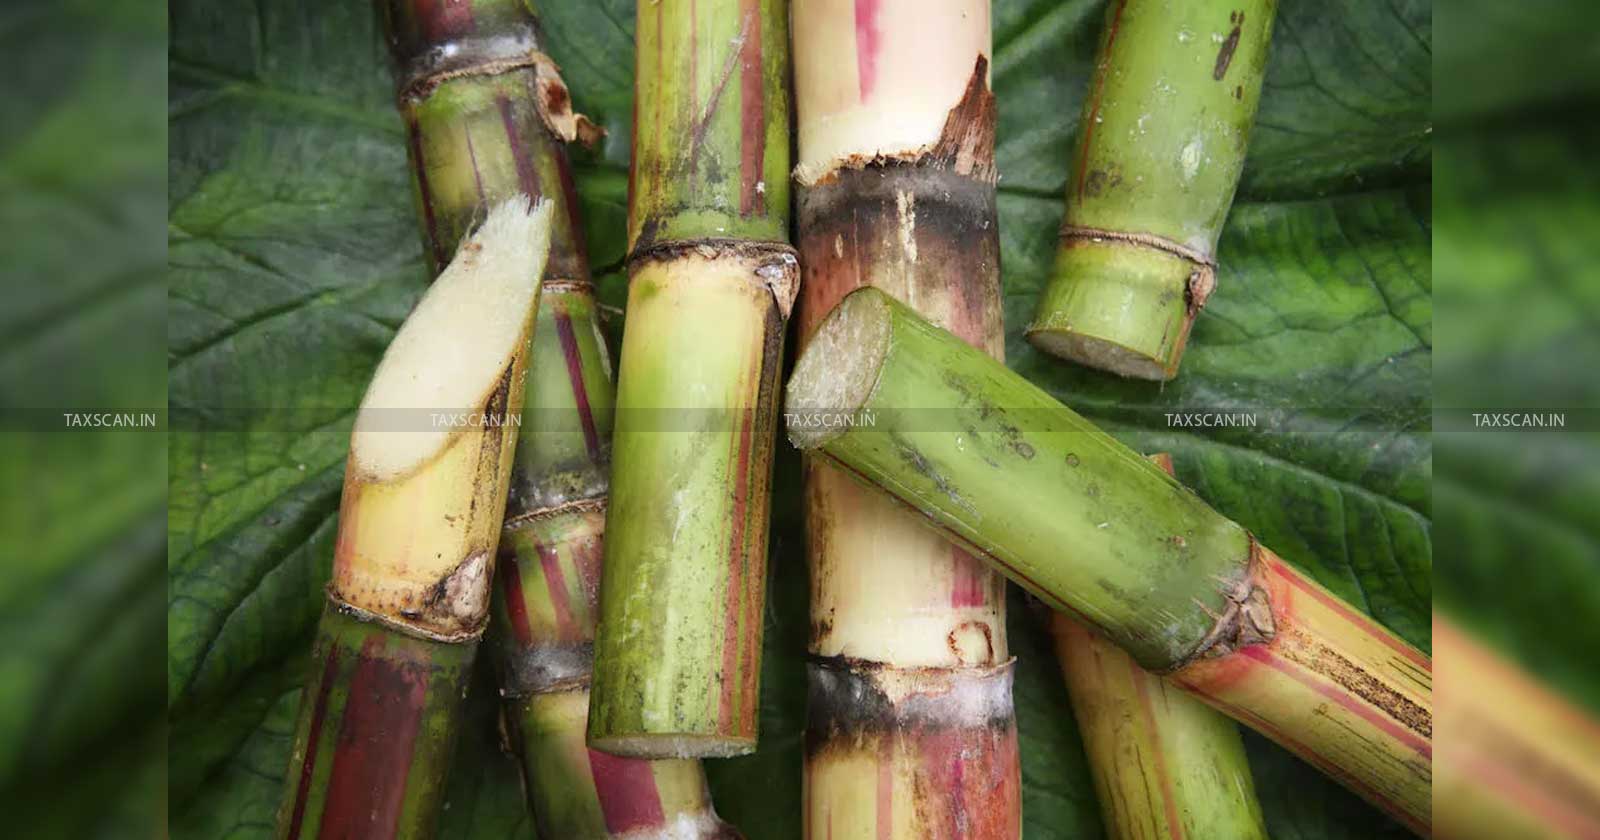 Price paid by Sugar Cooperatives - Purchase of Sugar Cane - FRP - Sugar Cane - Recent Amendment -Sugar Cooperatives - ITAT - taxscan